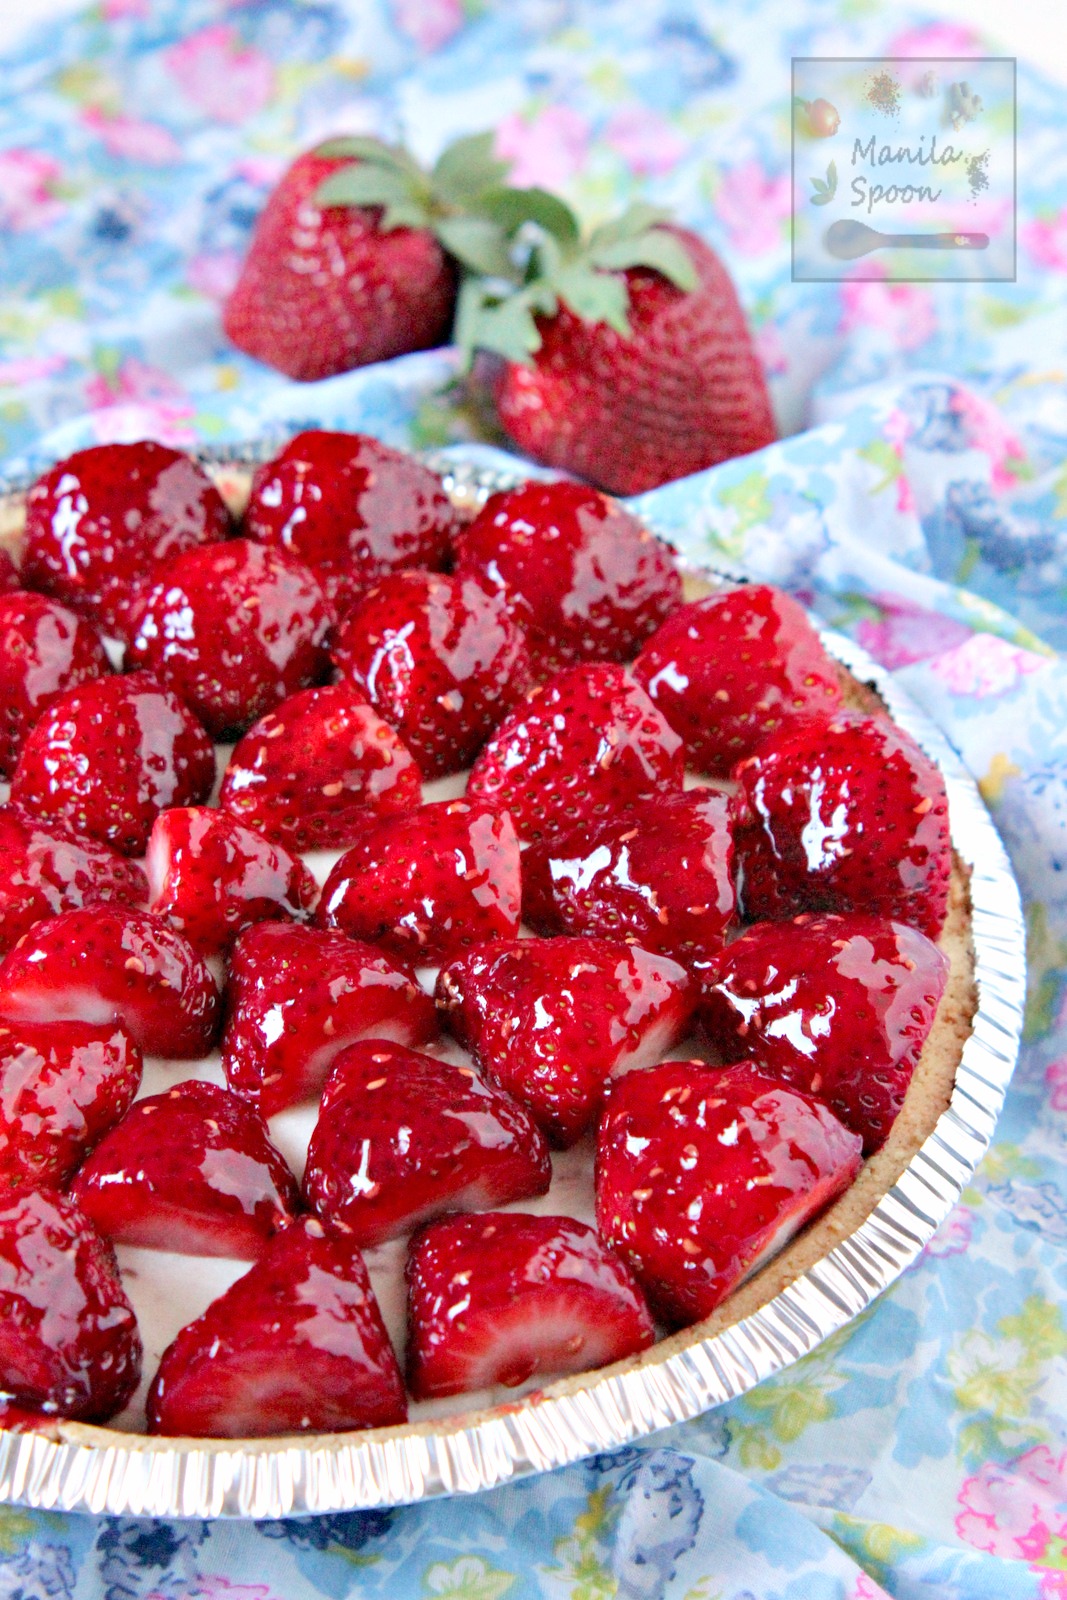 Glazed fresh and juicy strawberries and luscious white chocolate cheesecake make up this ultimate summer pie! NO BAKE, easy and delicious recipe that will make everyone happy! | manilaspoon.com